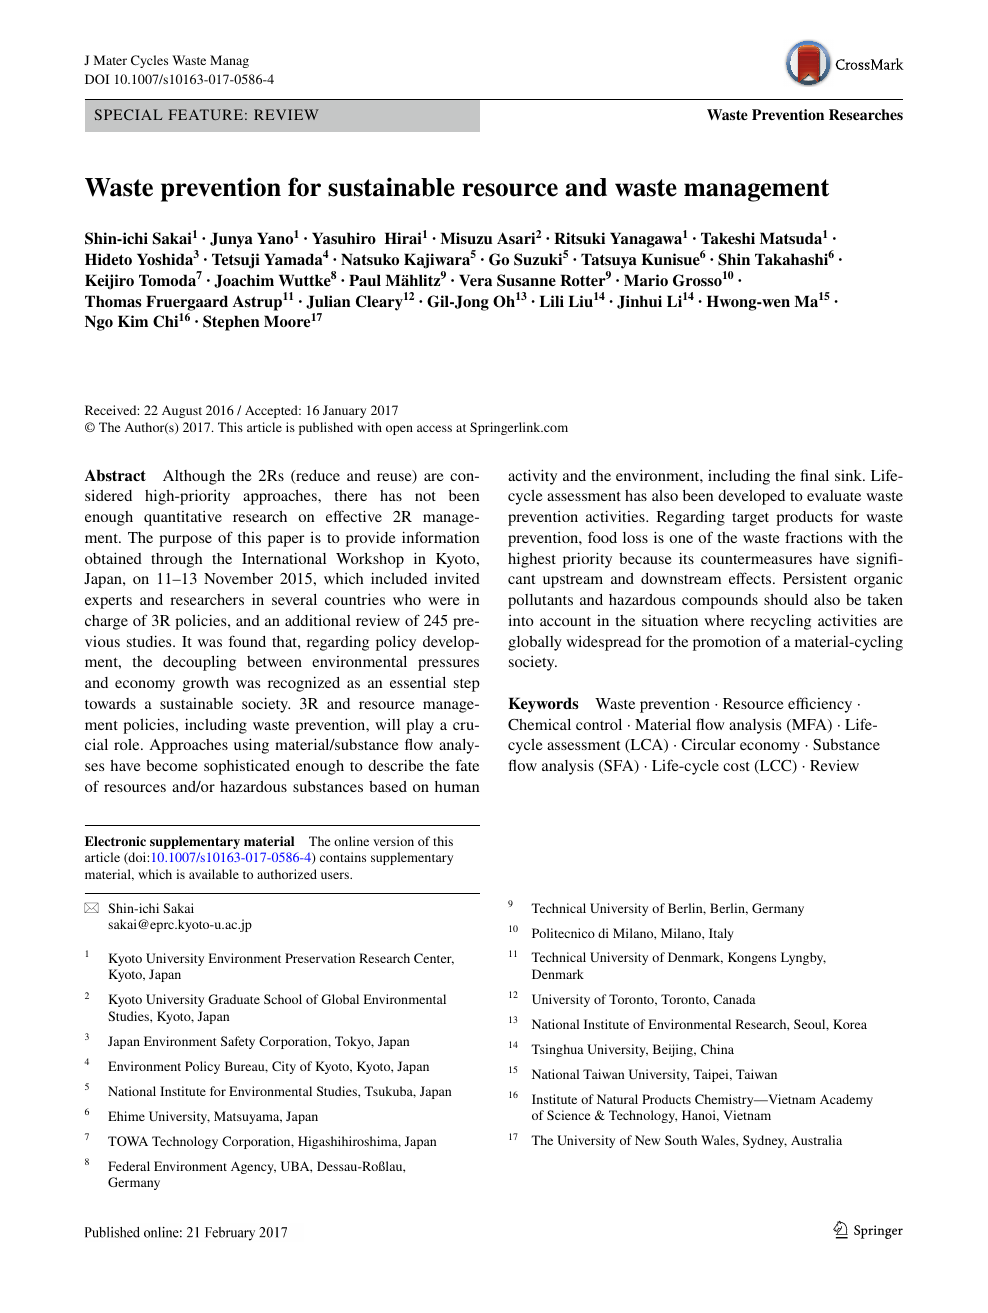 Waste Prevention For Sustainable Resource And Waste Management Topic Of Research Paper In Earth And Related Environmental Sciences Download Scholarly Article Pdf And Read For Free On Cyberleninka Open Science Hub